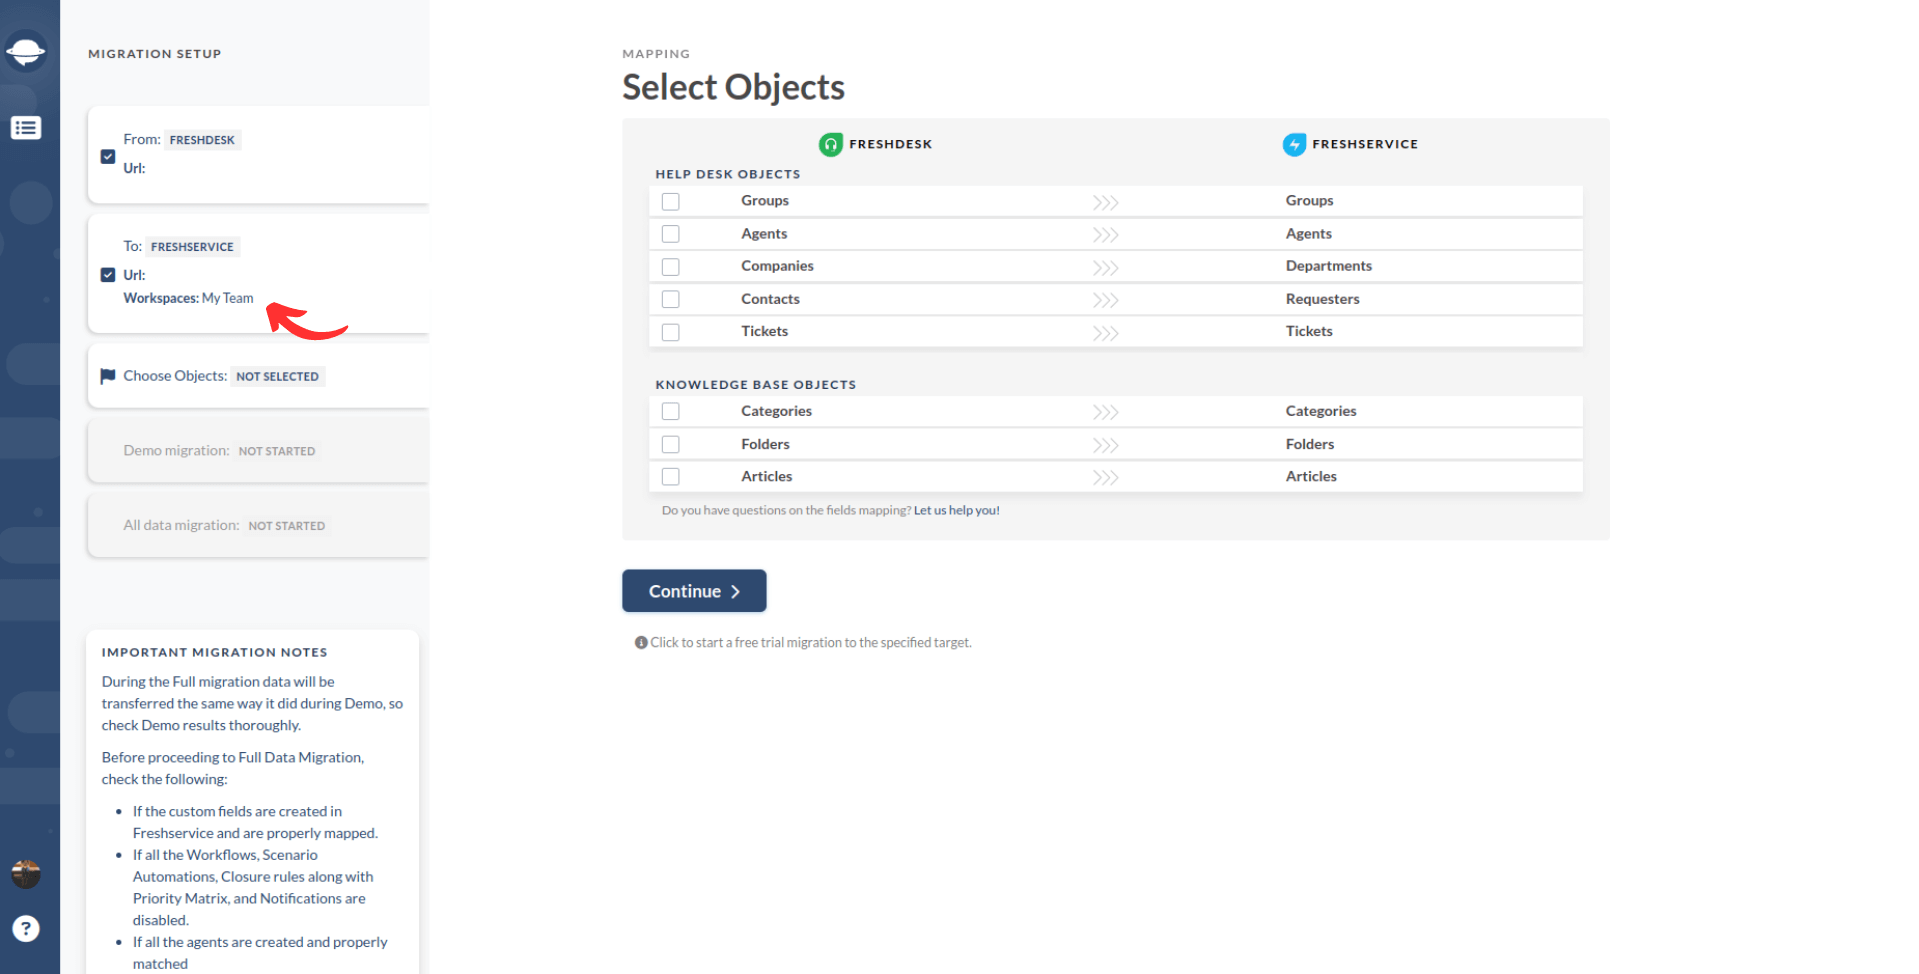 Freshdesk to Freshservice_Select Objects_Workspace